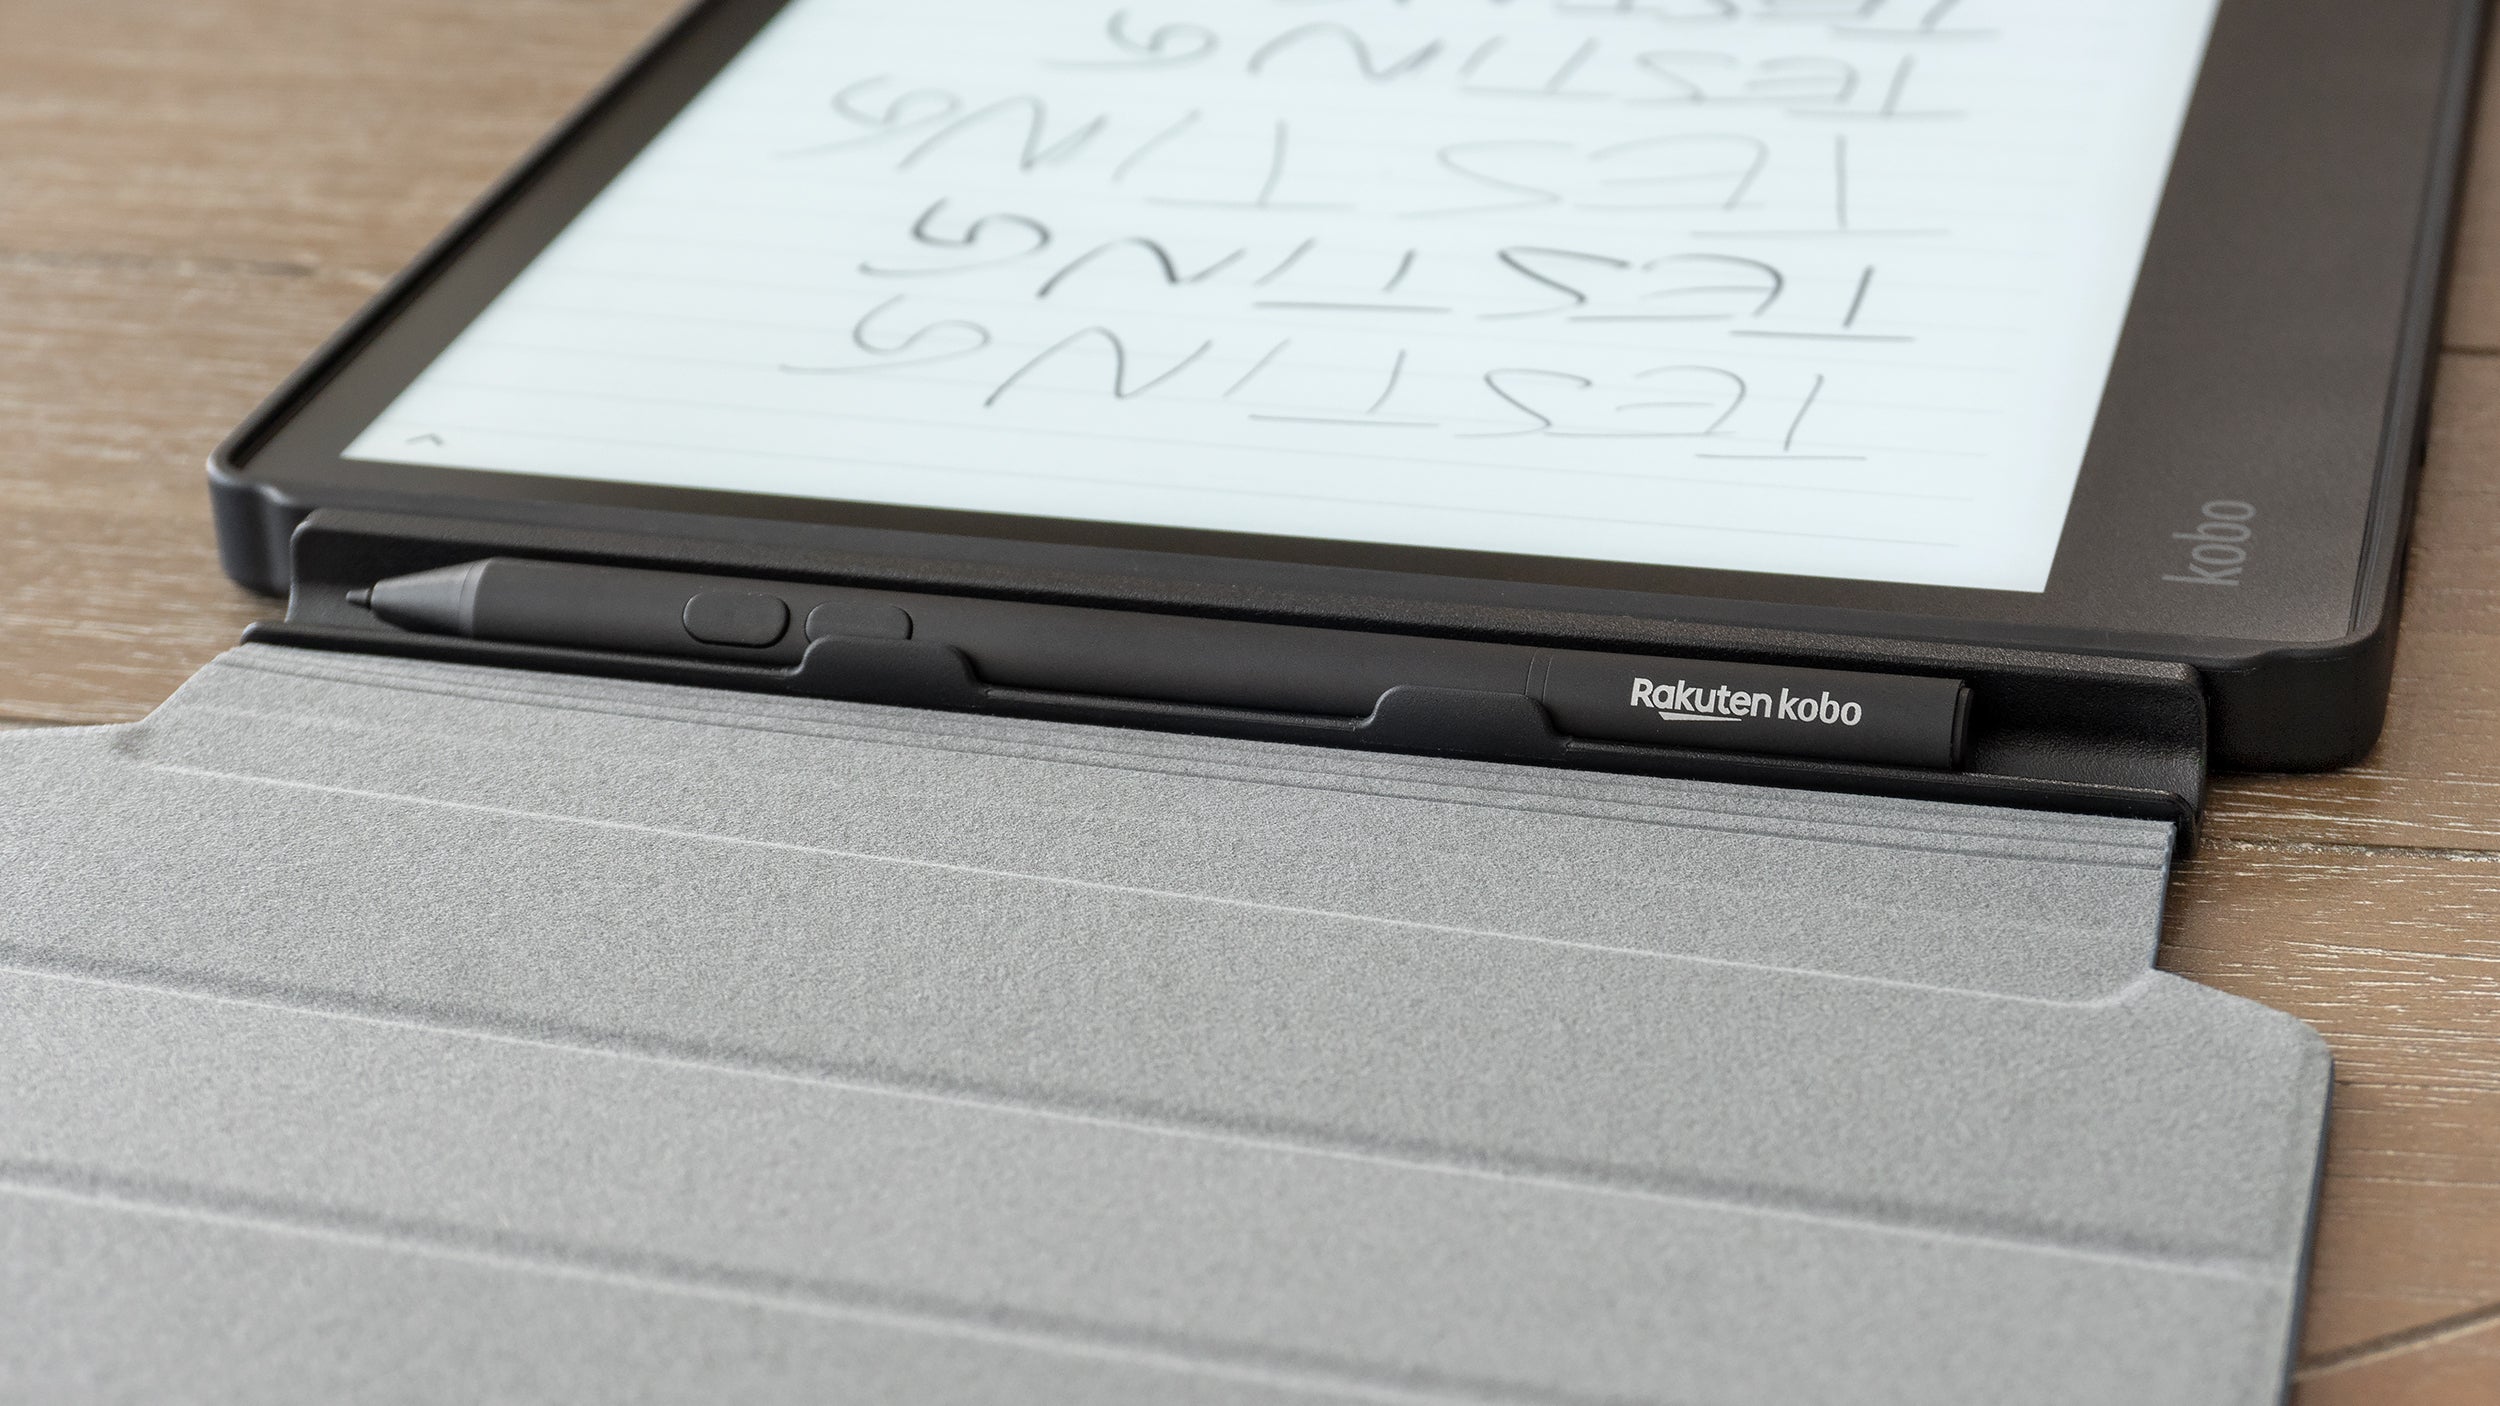 The Kobo Elipsa's included case and SleepCover include a secure place to store the stylus when not in use. (Photo: Andrew Liszewski/Gizmodo)